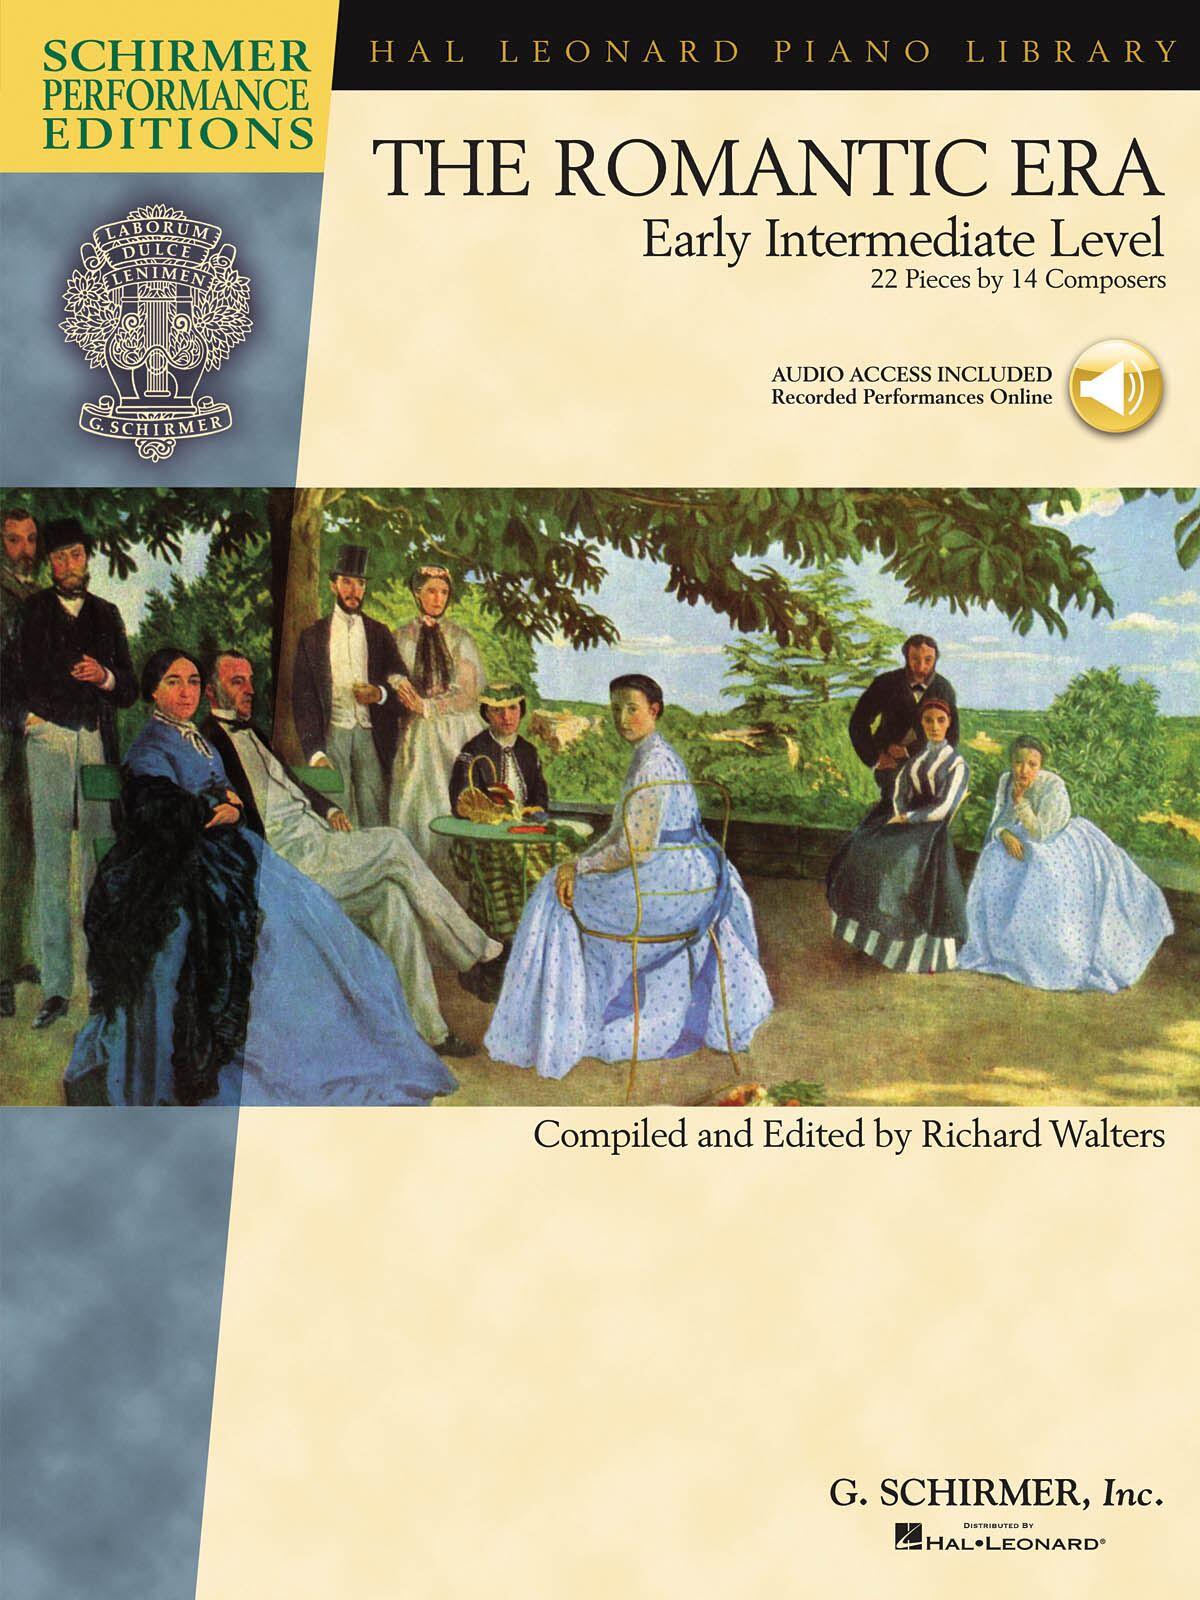 The Romantic Era Early Intermediate Level - 22 Pieces by 14 Composers : photo 1